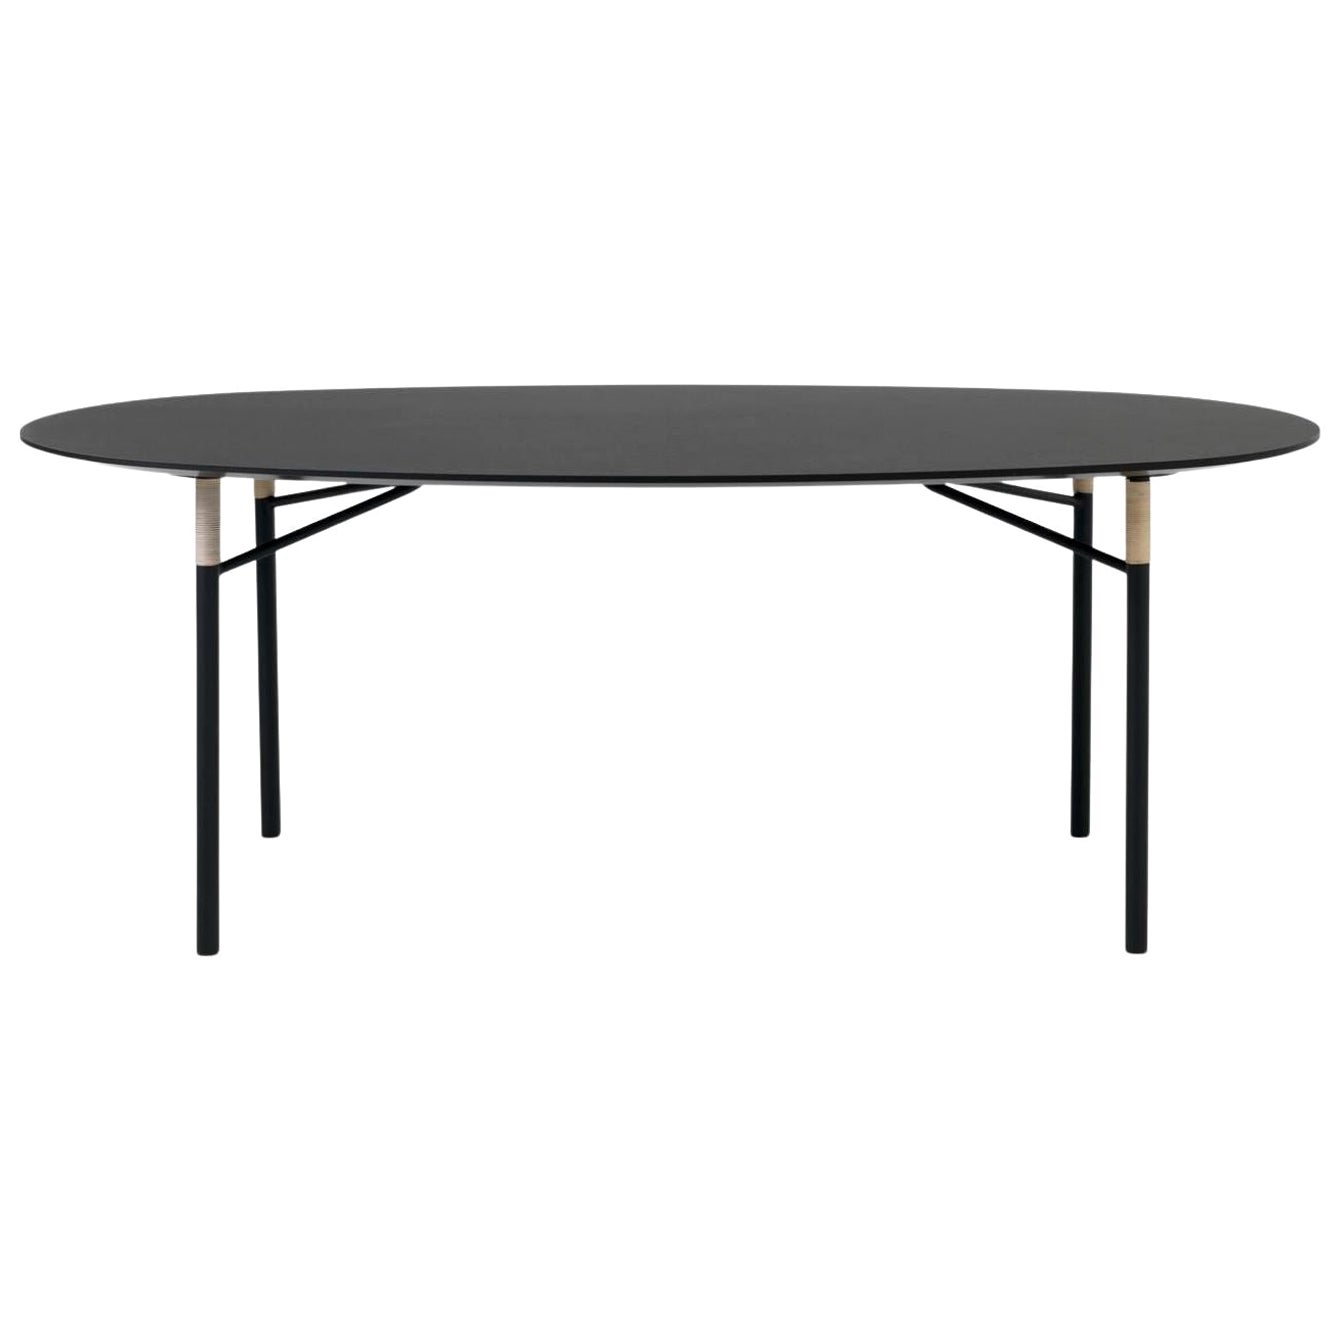 Affinity Ellipse Dining Table Black by Warm Nordic